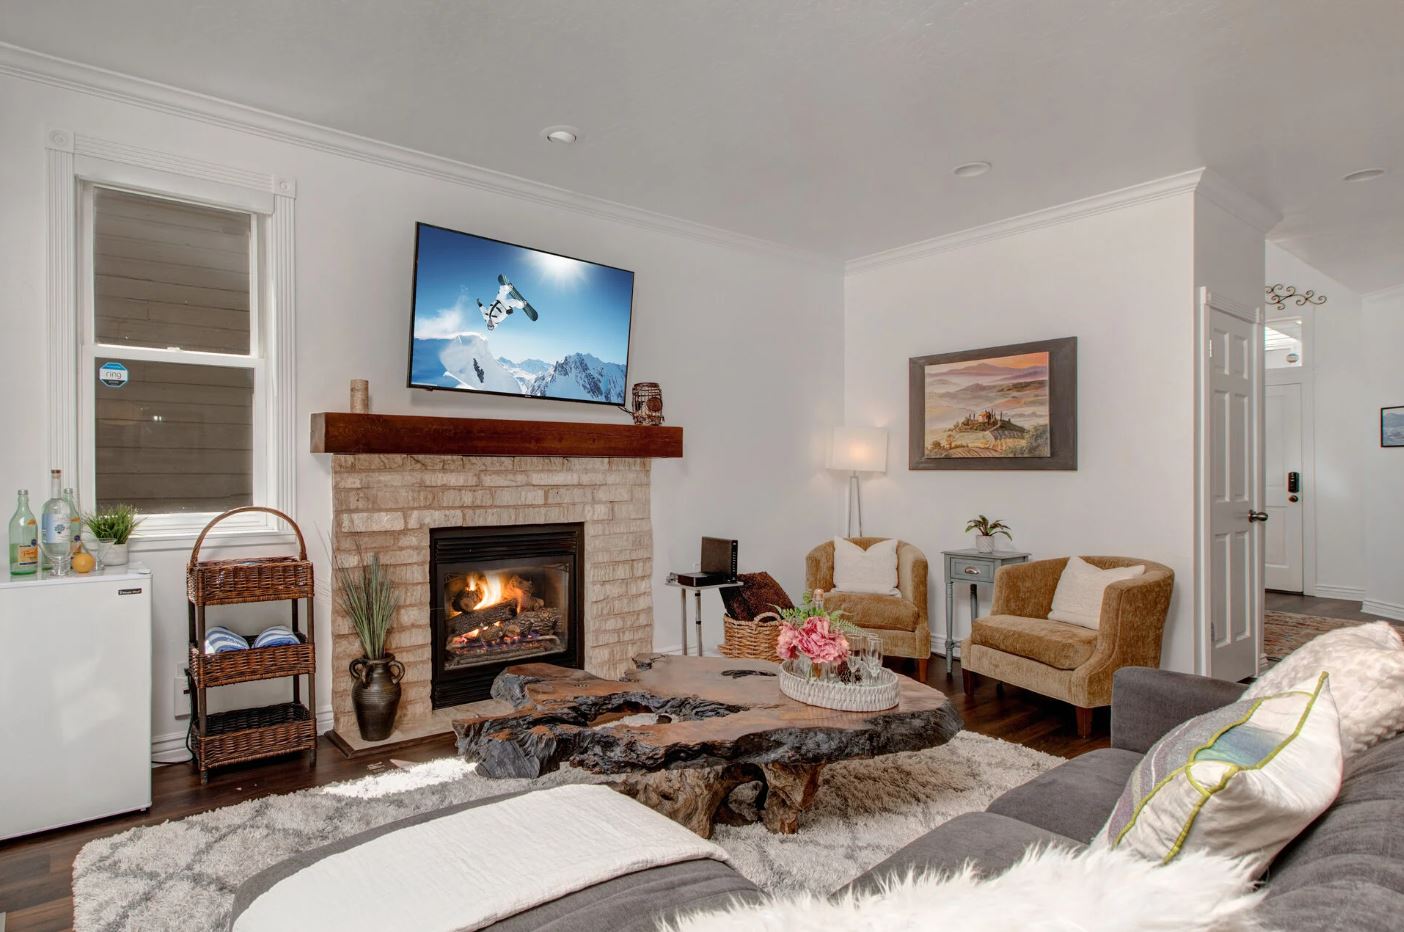 The living room of this Park city vacation property